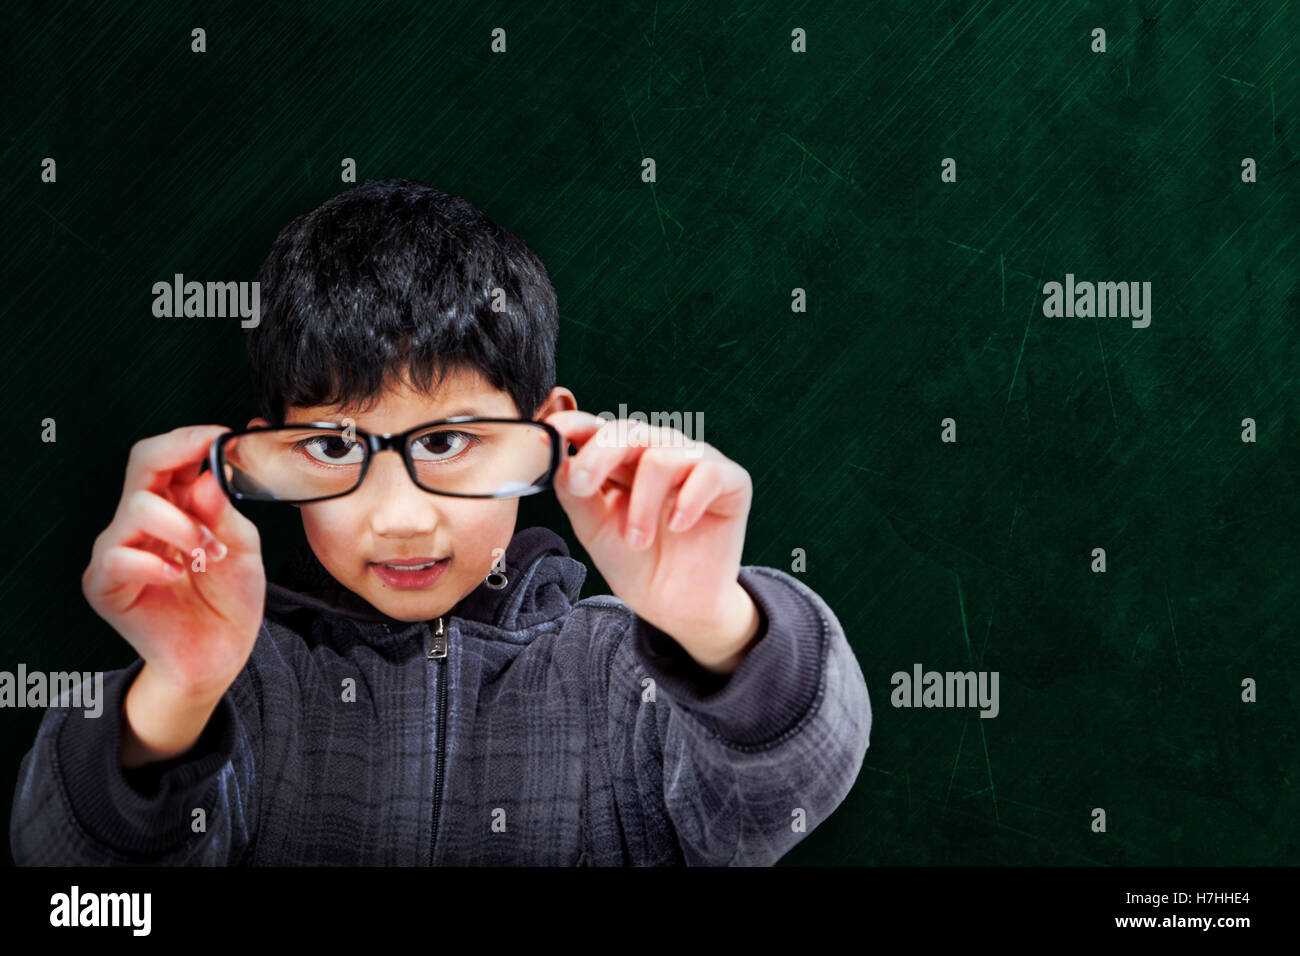 Cute Asian boy holding up eyeglasses on chalkboard background with copy space. Stock Photo